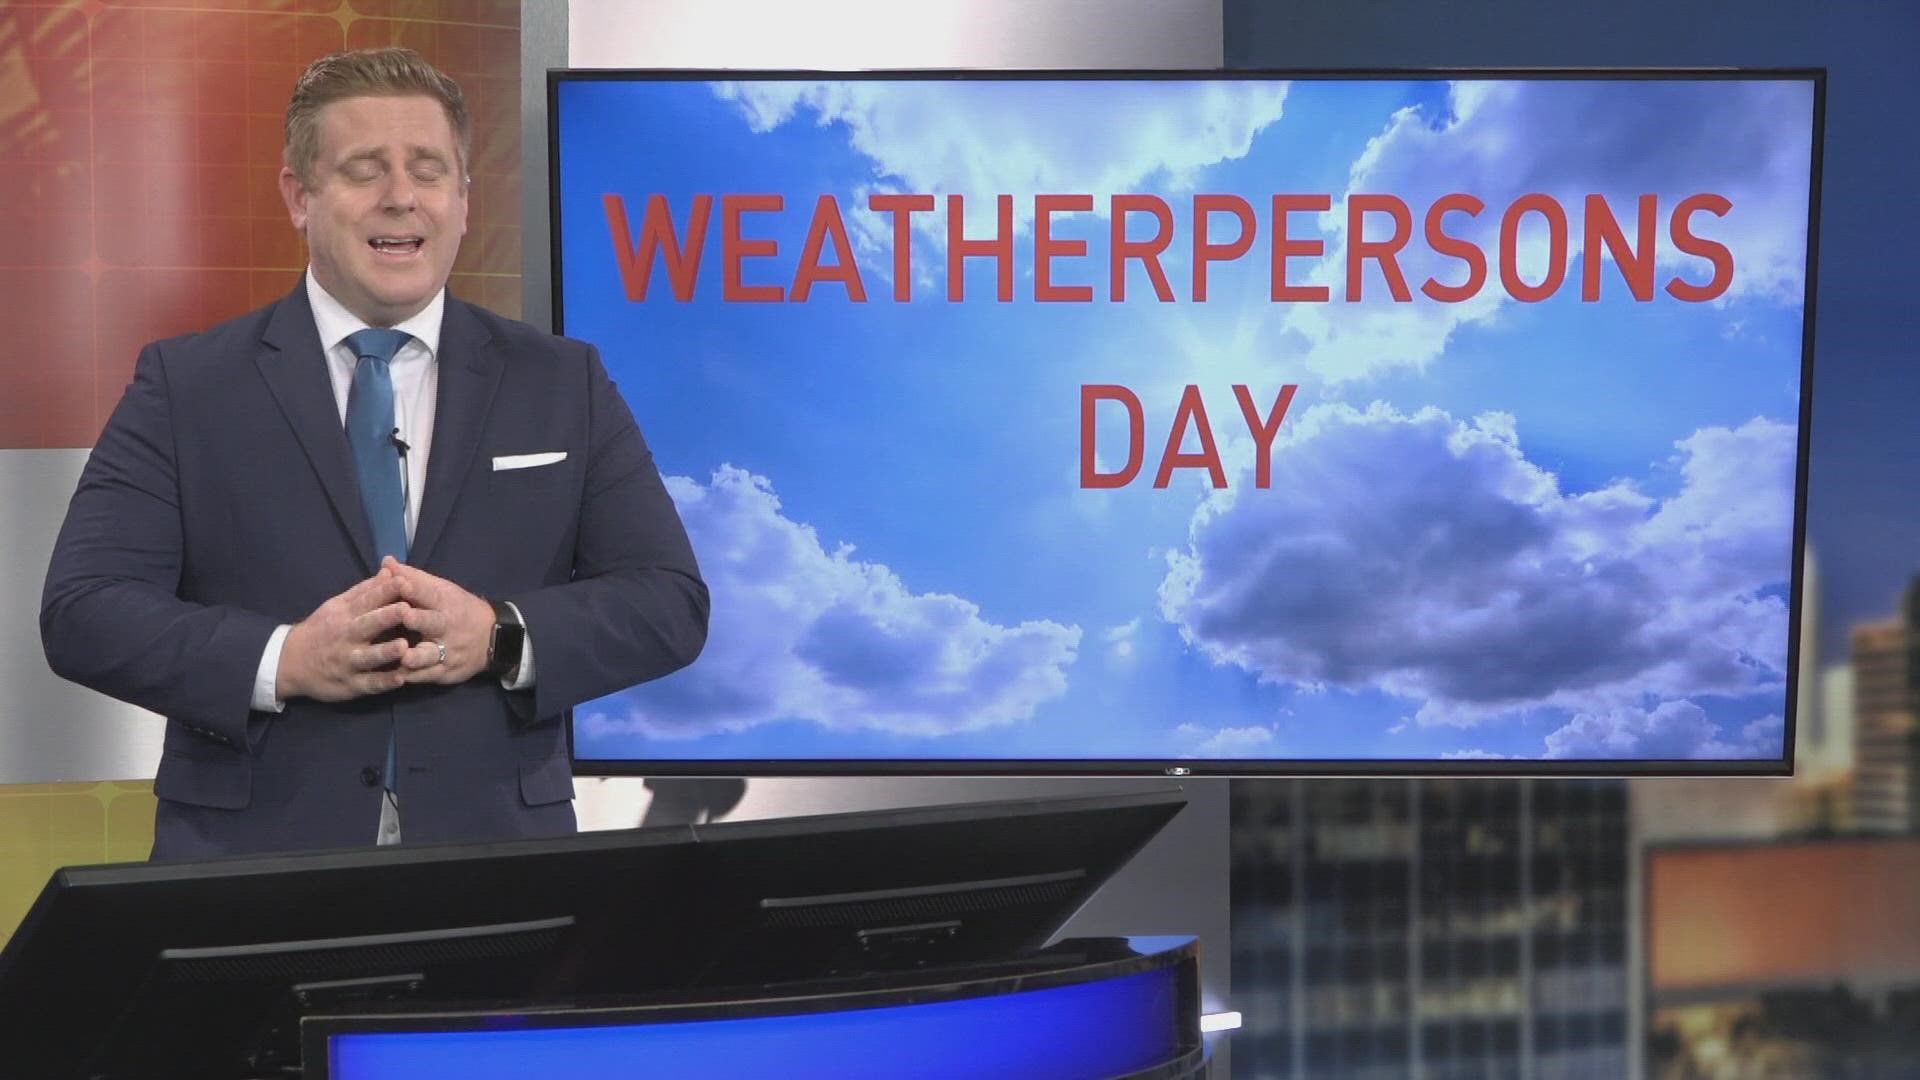 What is the origin of National Weatherpersons day?